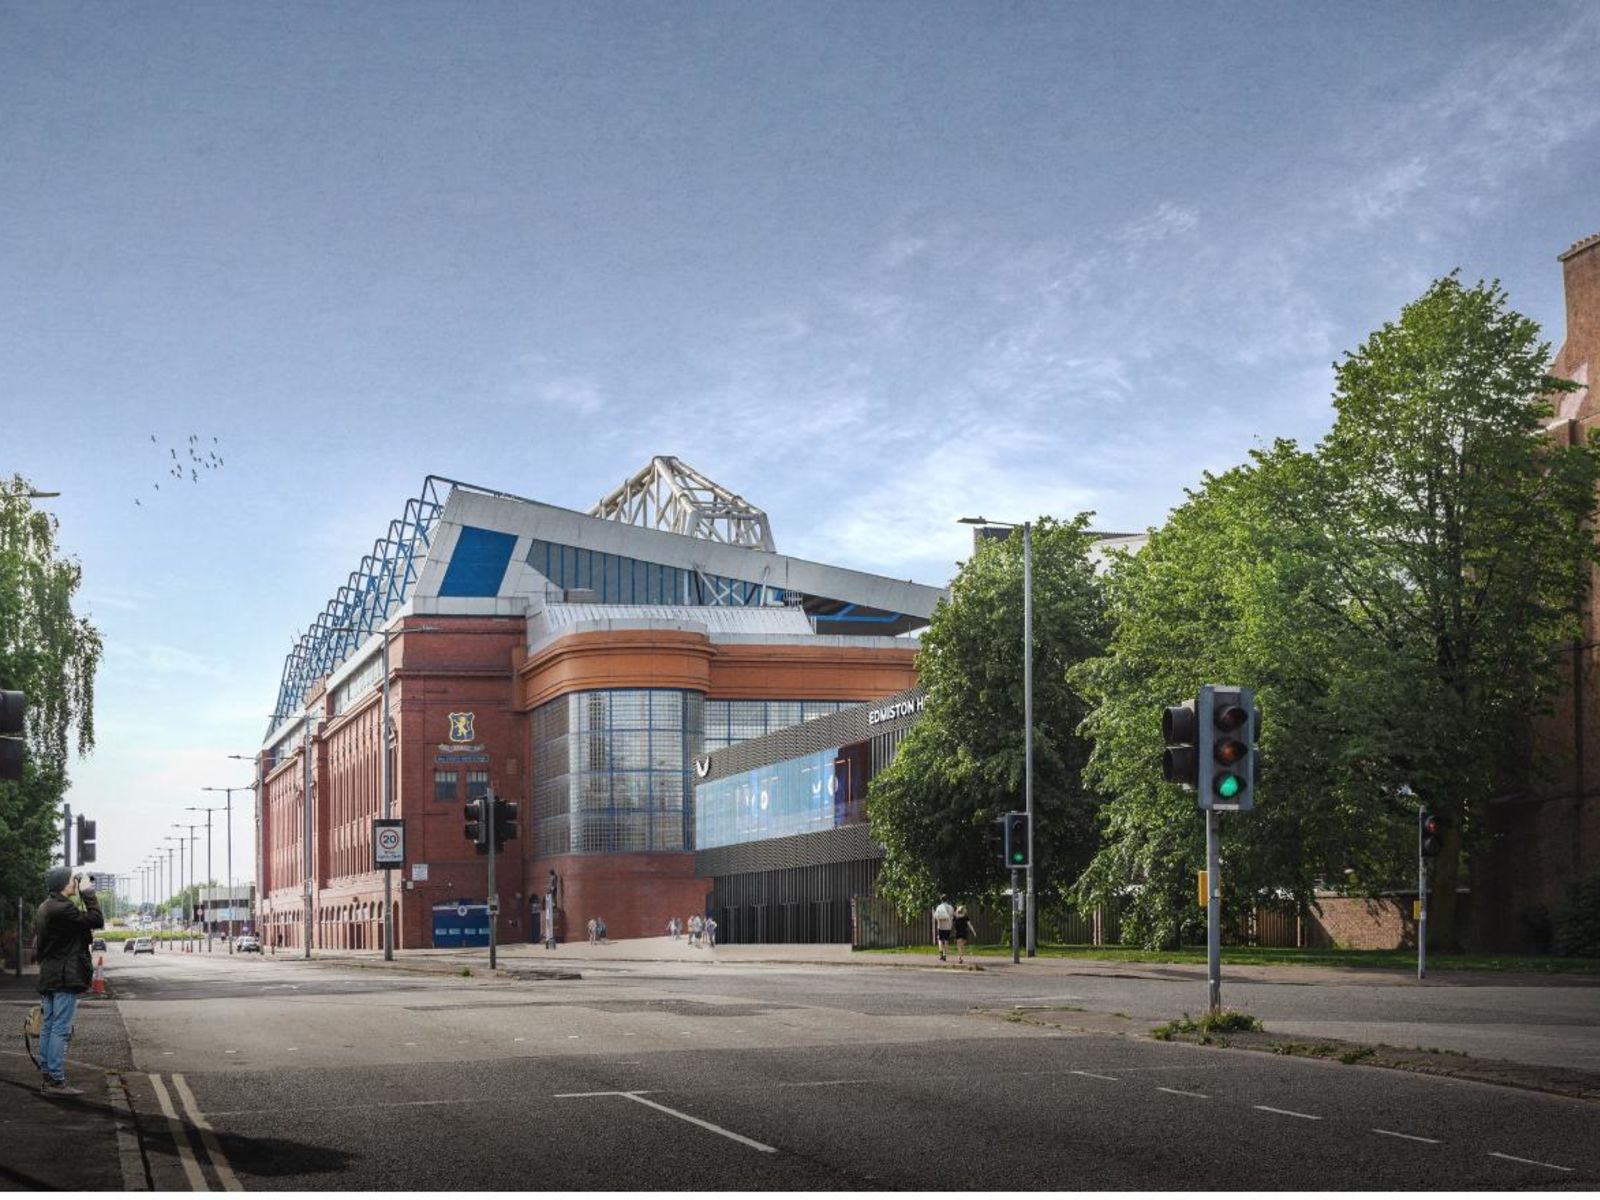 Rangers FC draw up plans to build new Edmiston House